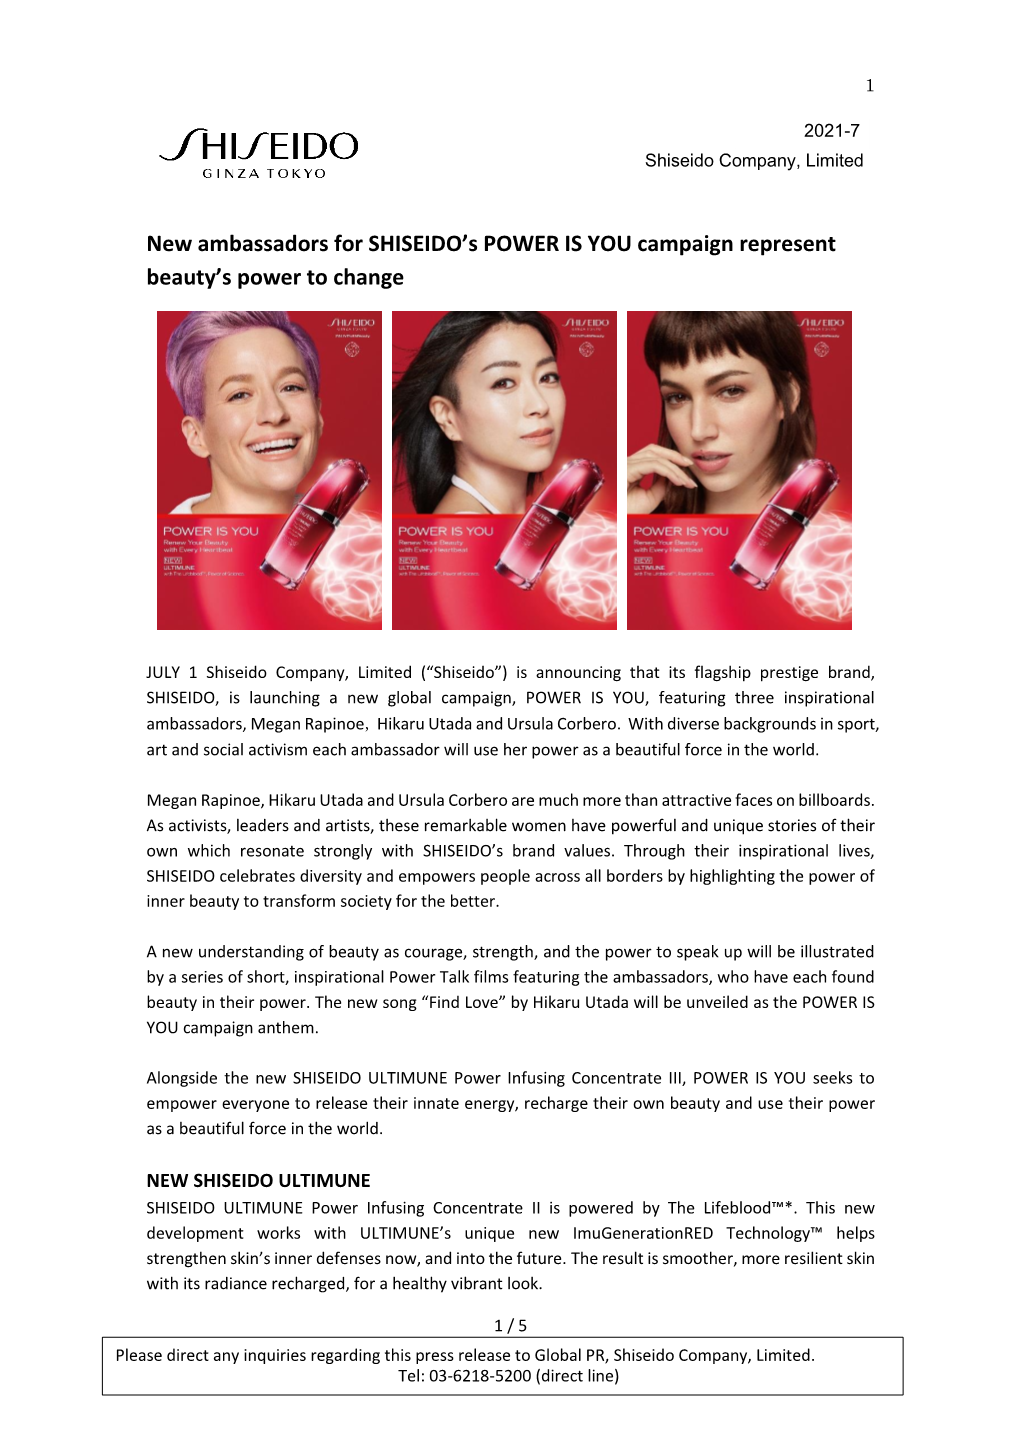 New Ambassadors for SHISEIDO's POWER IS YOU Campaign